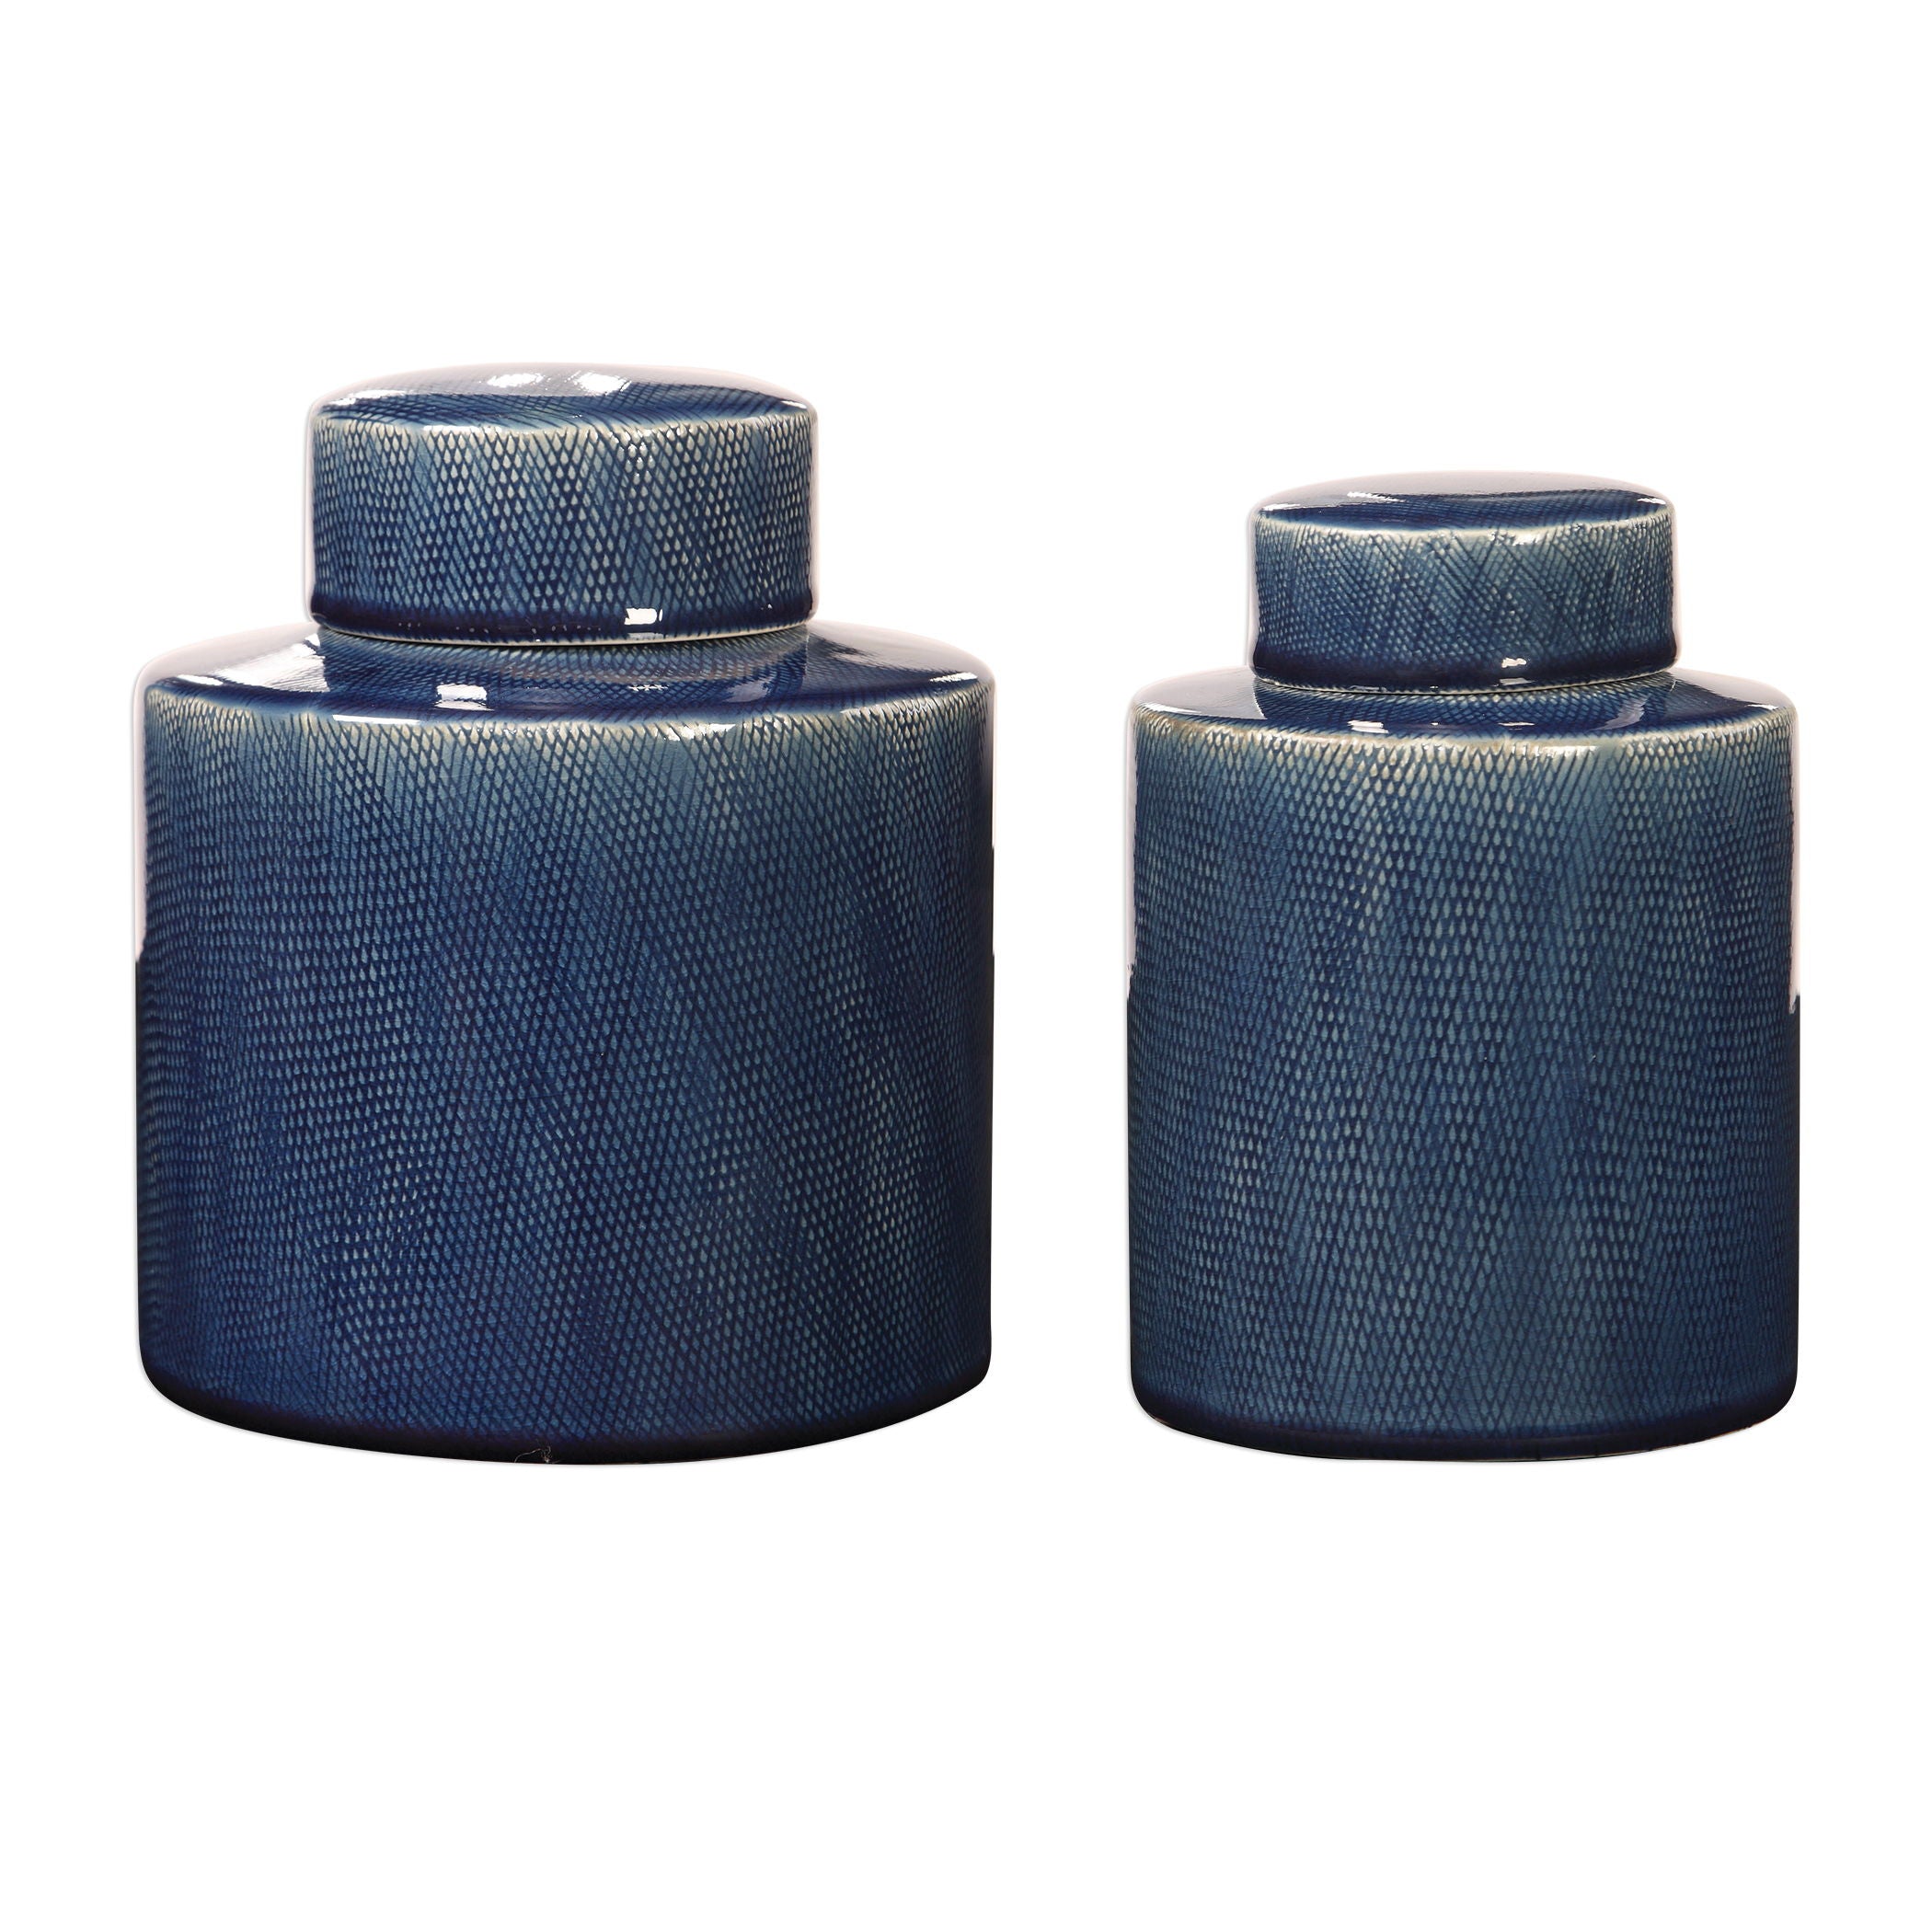 Saniya - Containers (Set of 2) - Blue